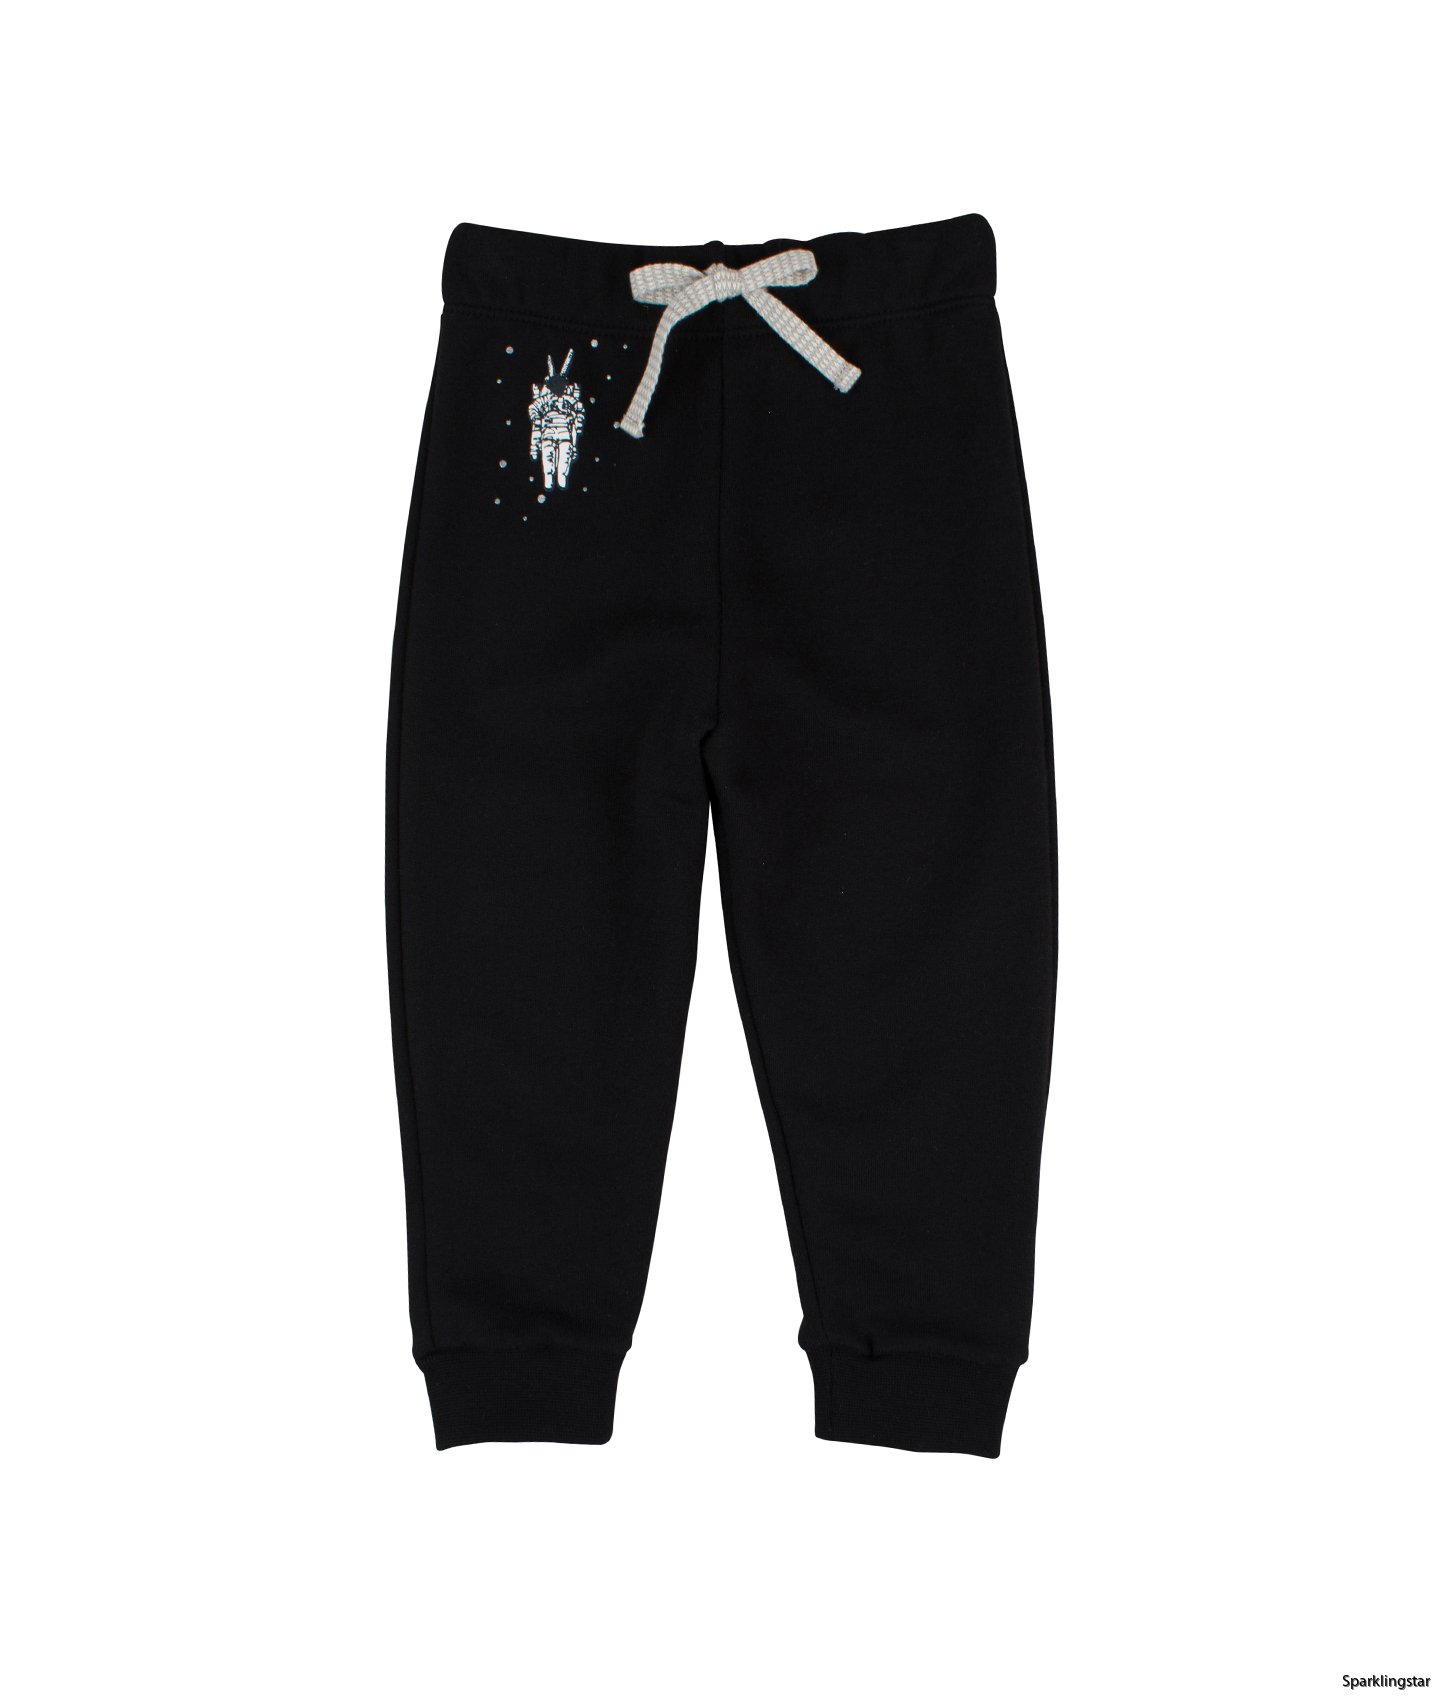 Livly Joggers Black With Astronaut 